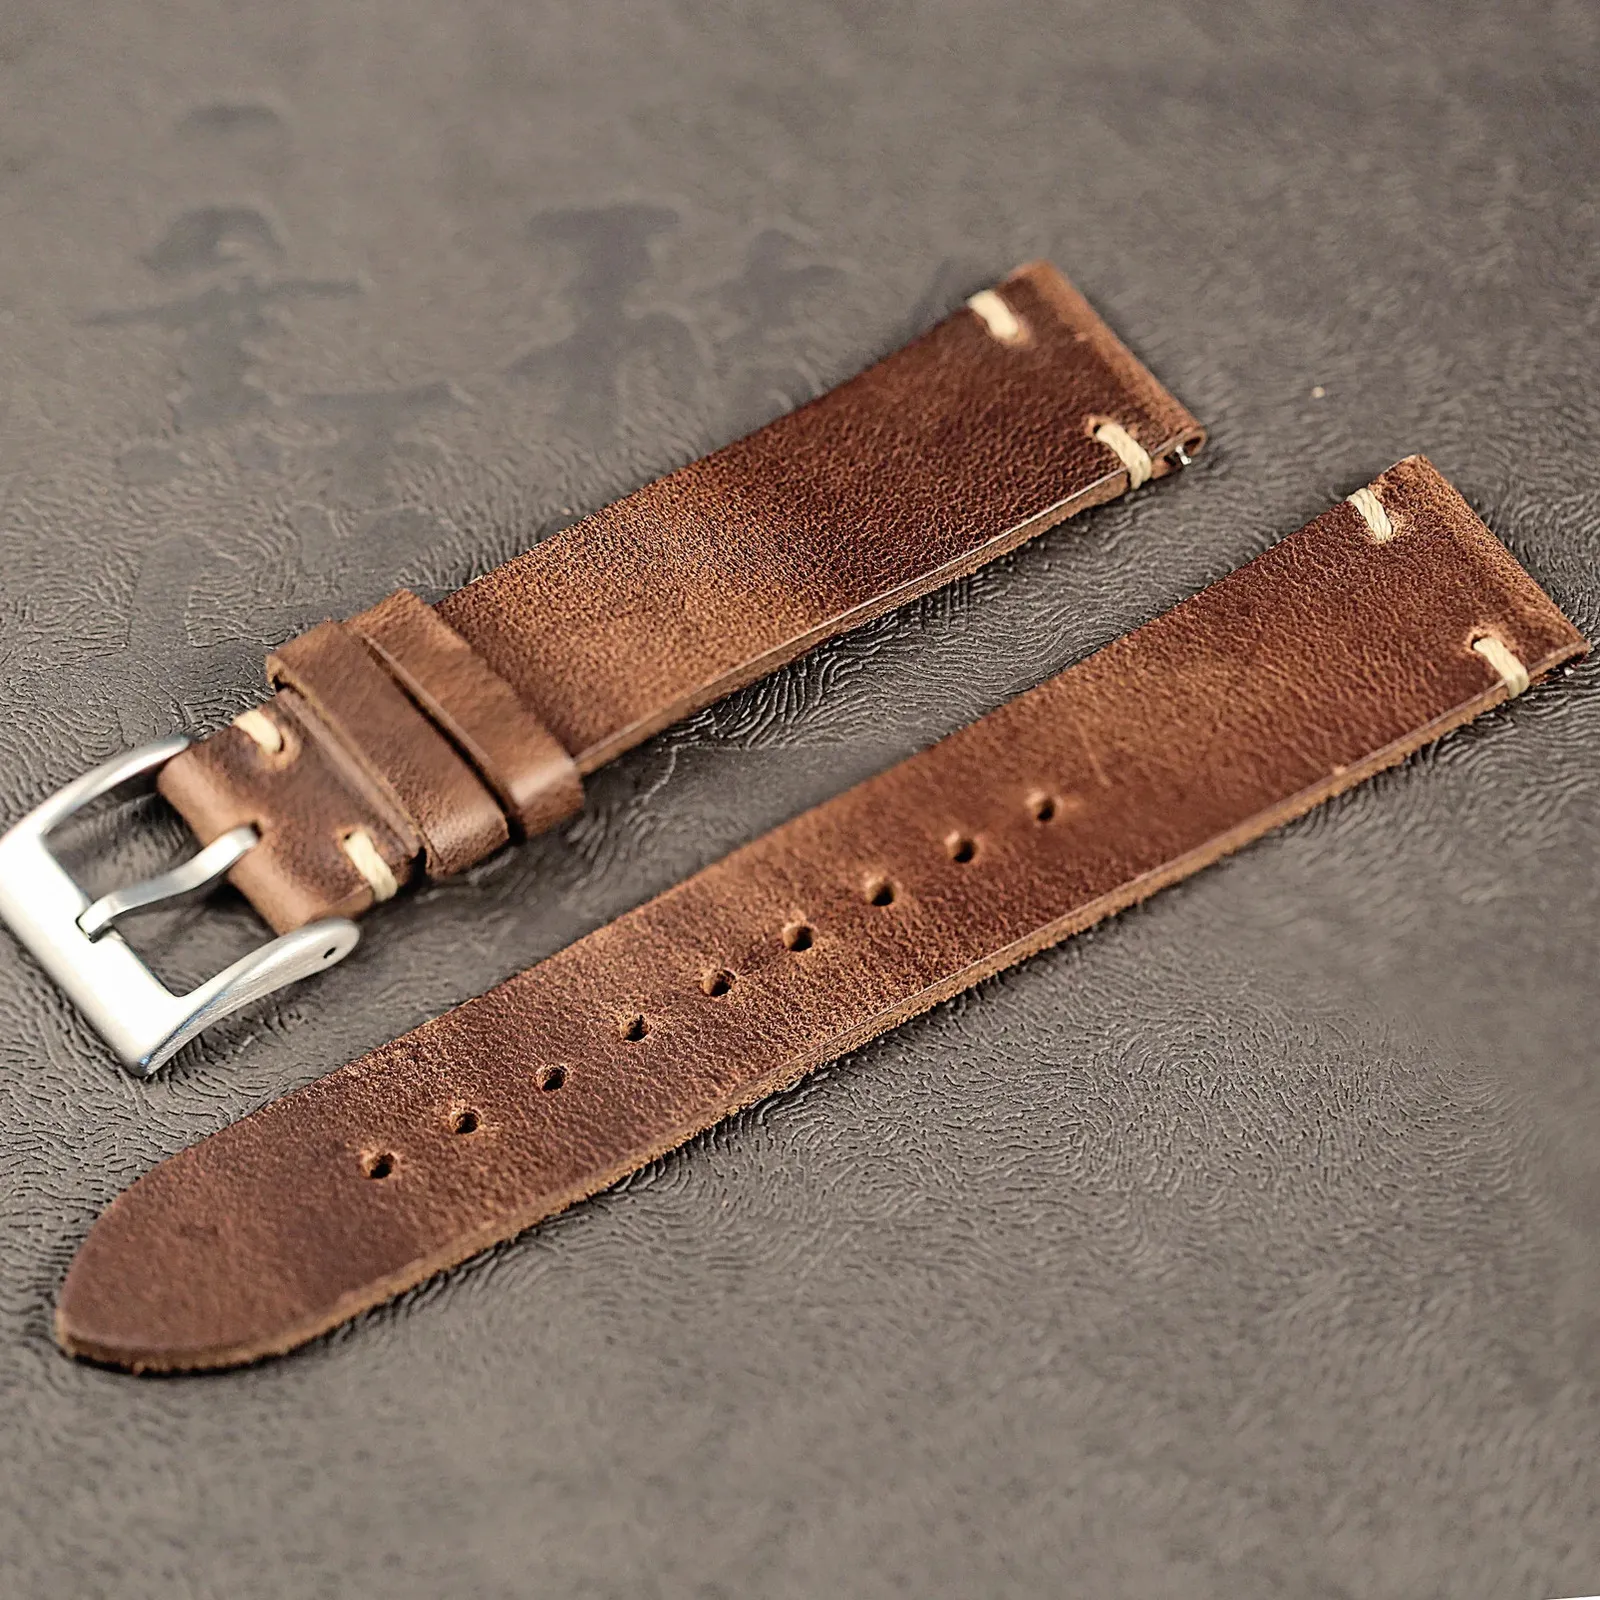 Horween US Chromexcel Leather Watch Bands Natural Soft Wrap Leather Leather Litraps 18mm 20mm 22mm 240320